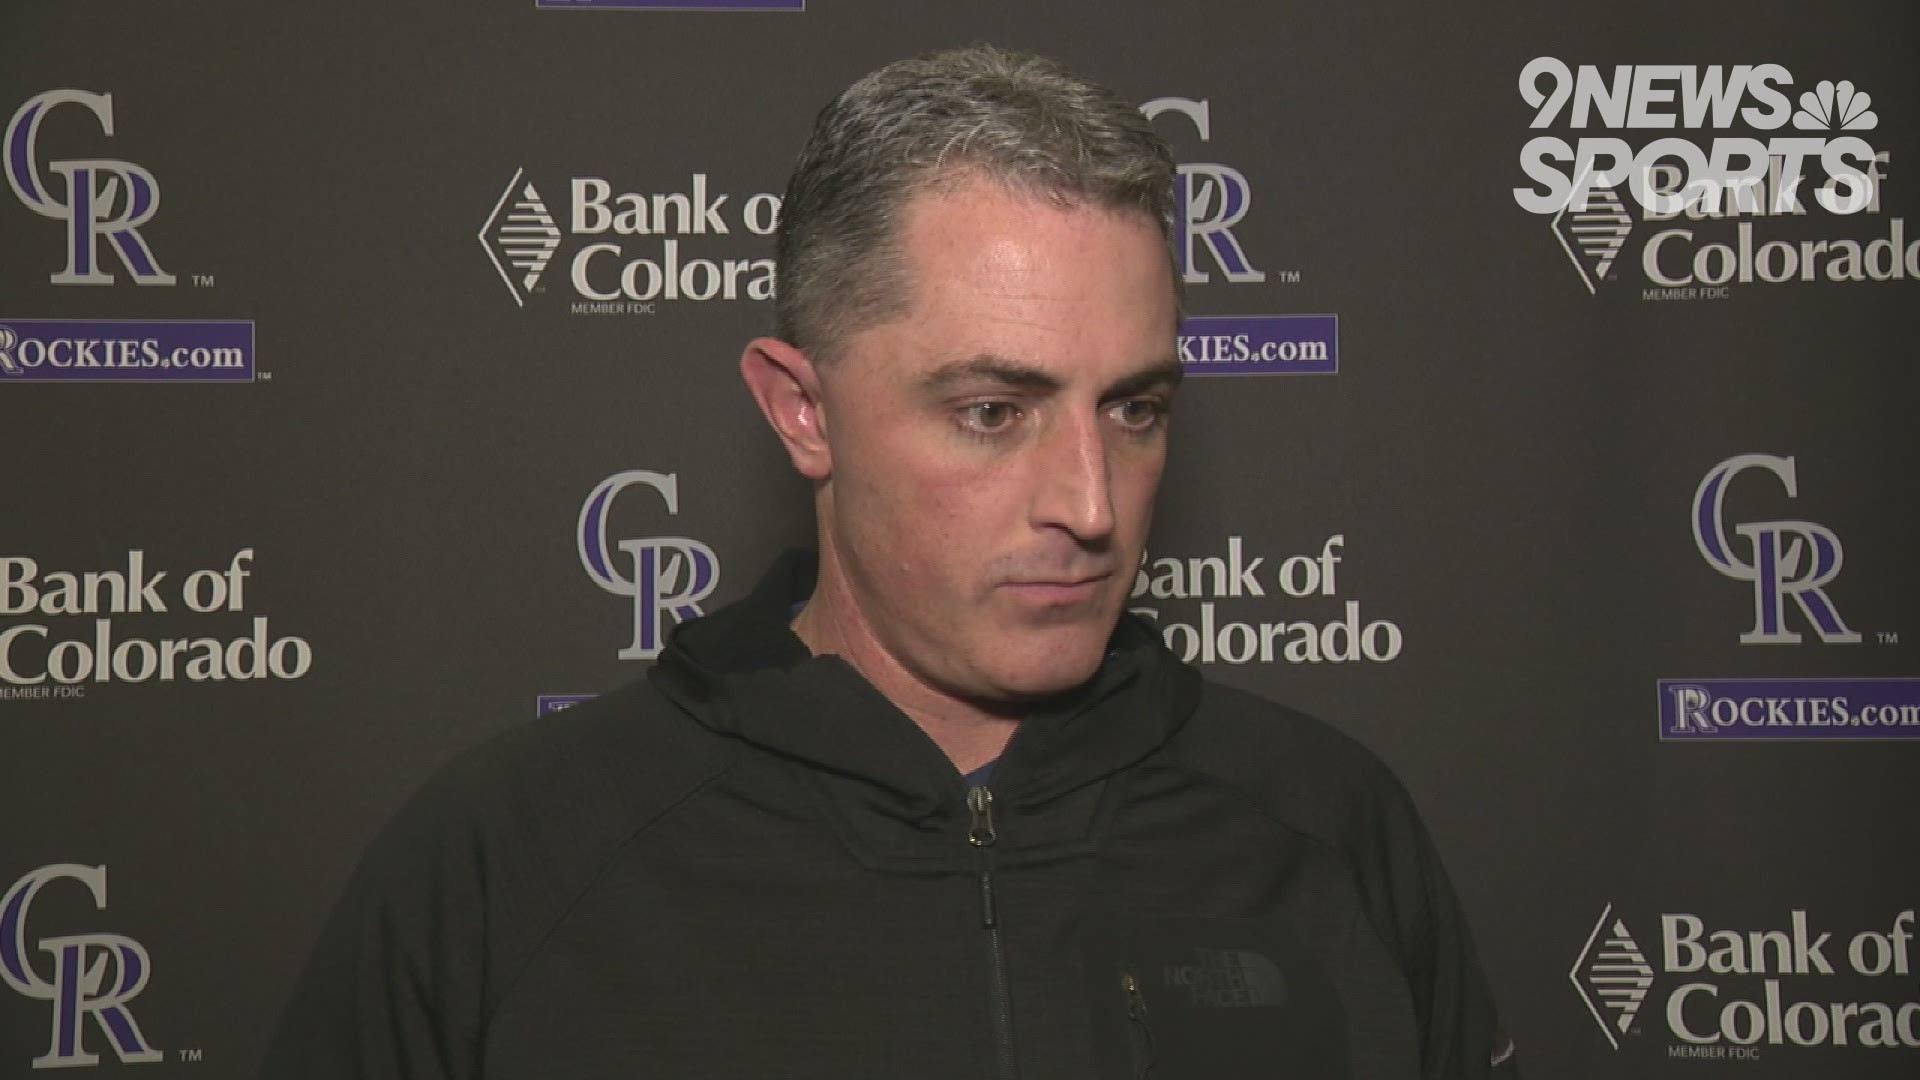 In his first meeting with the media since Arenado said he felt 'disrespected' by the team, Bridich declined to offer any sort of olive branch.